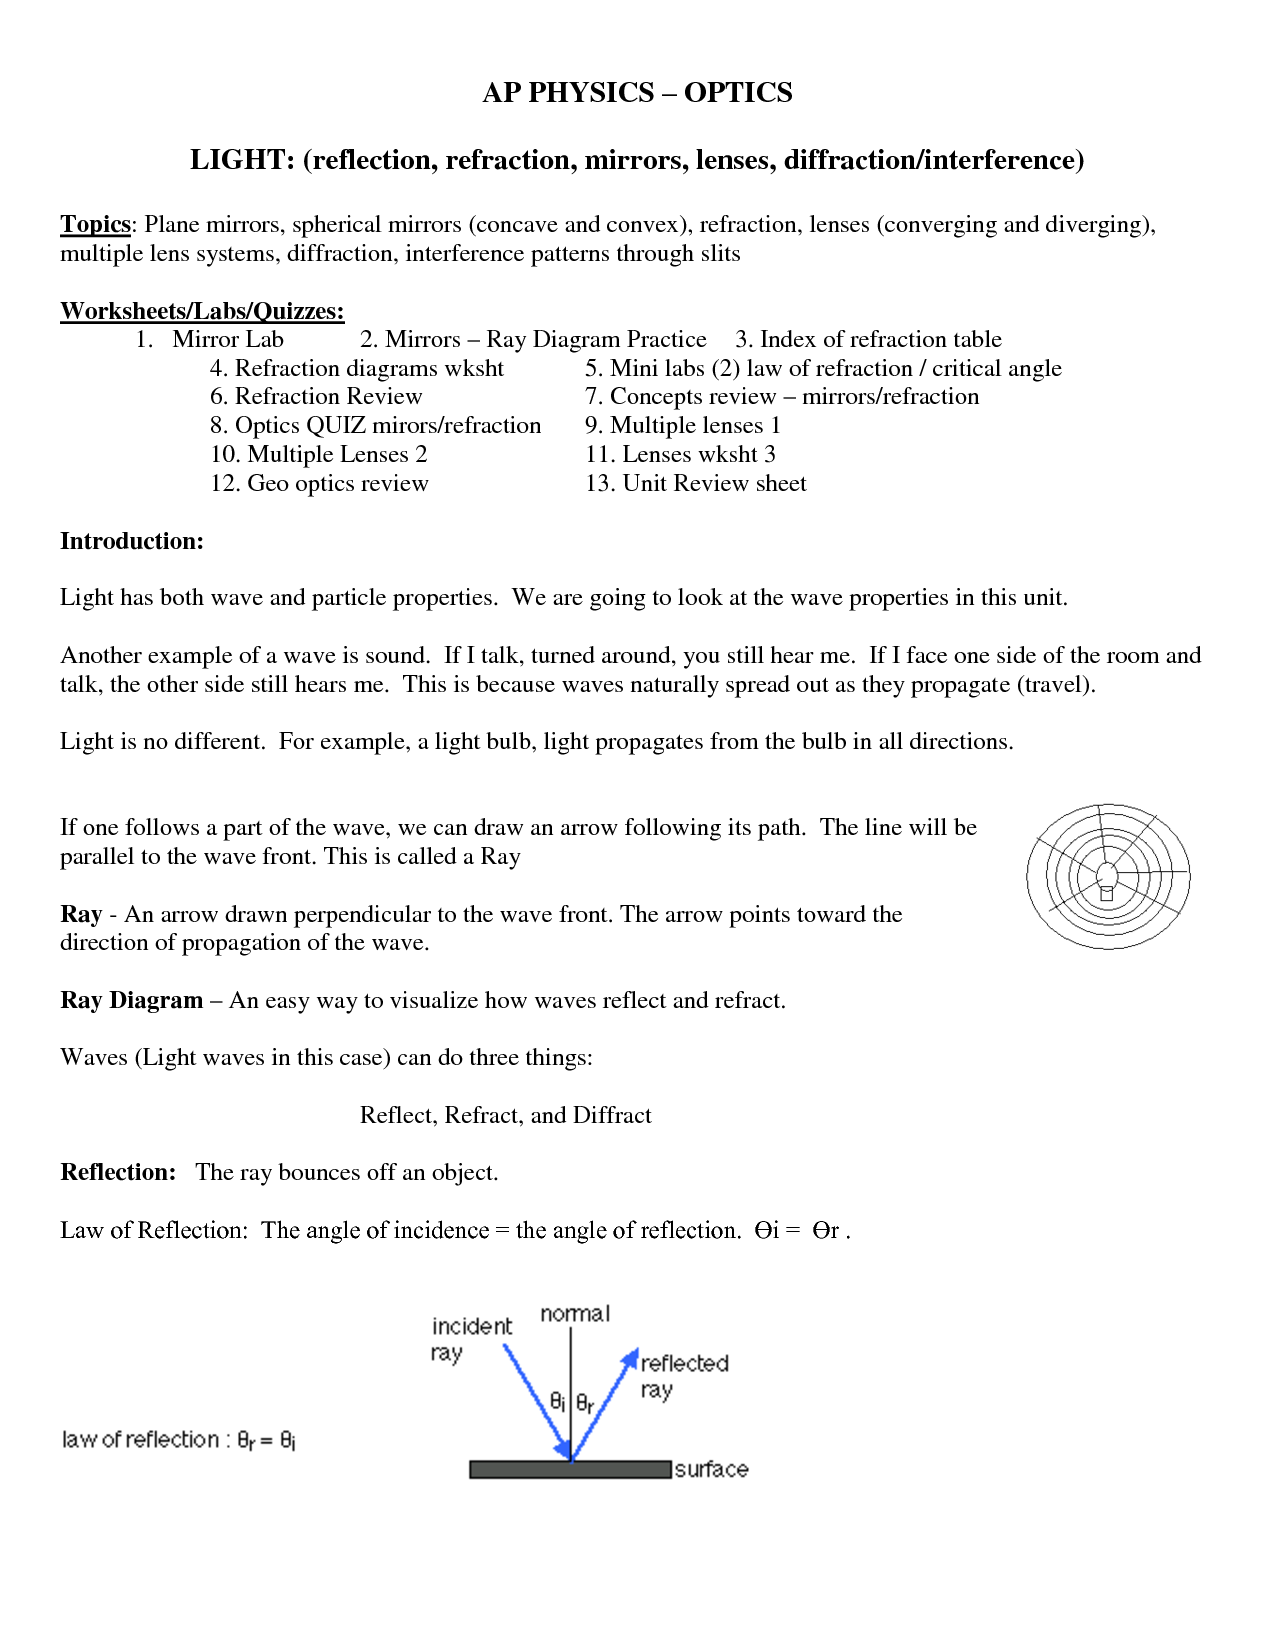 16-best-images-of-science-worksheets-on-reflection-light-reflection-and-refraction-worksheet